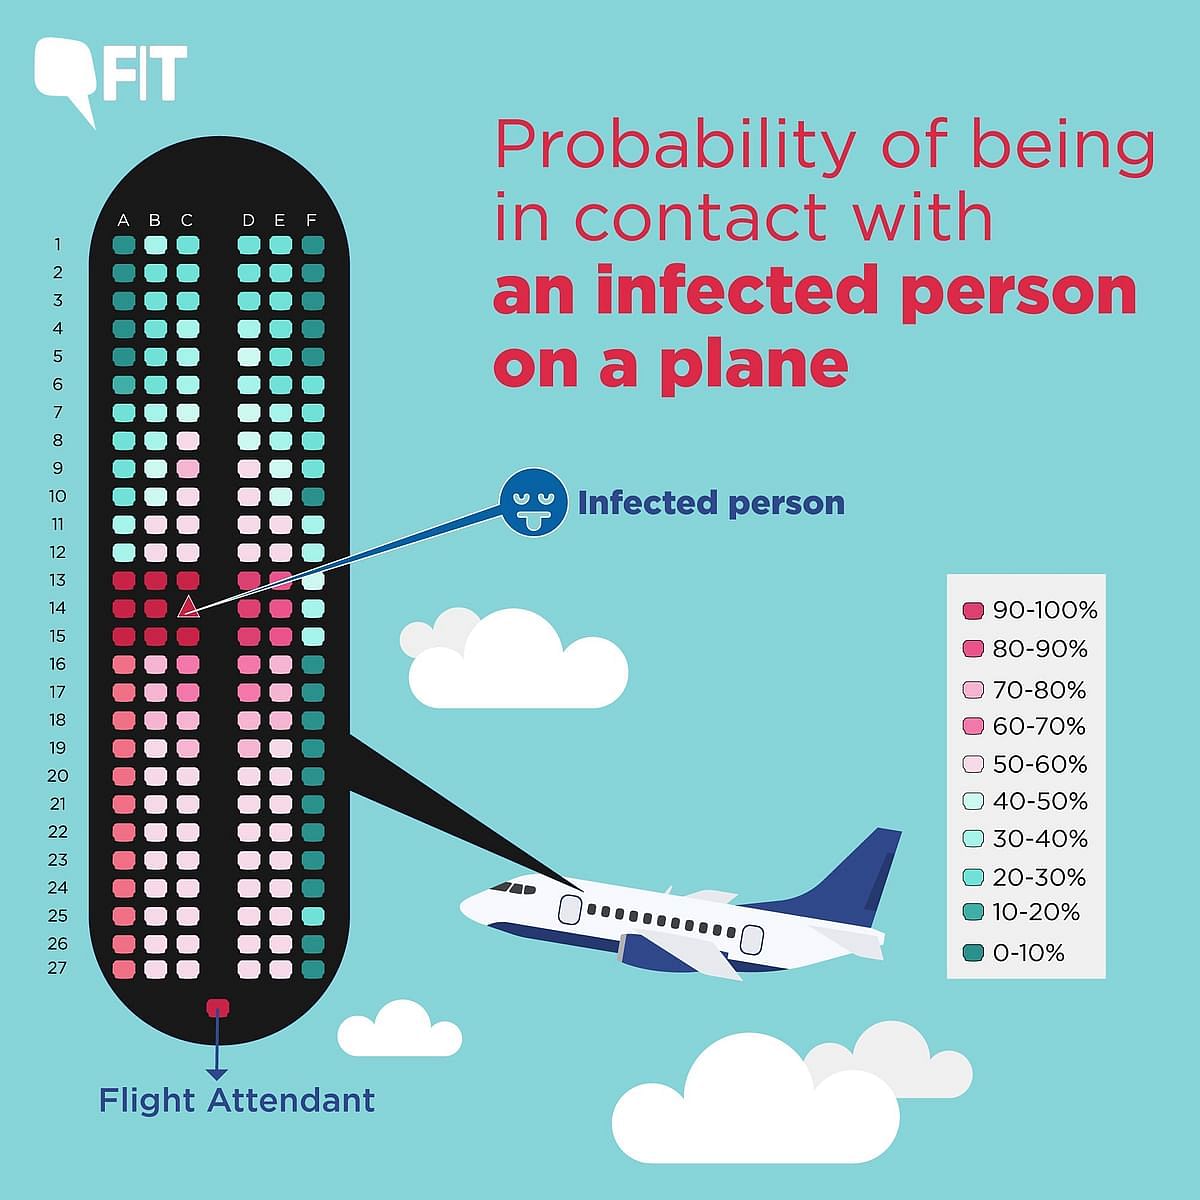 FAQs: ‘What Are My Chances of Catching COVID-19 on a Plane?’